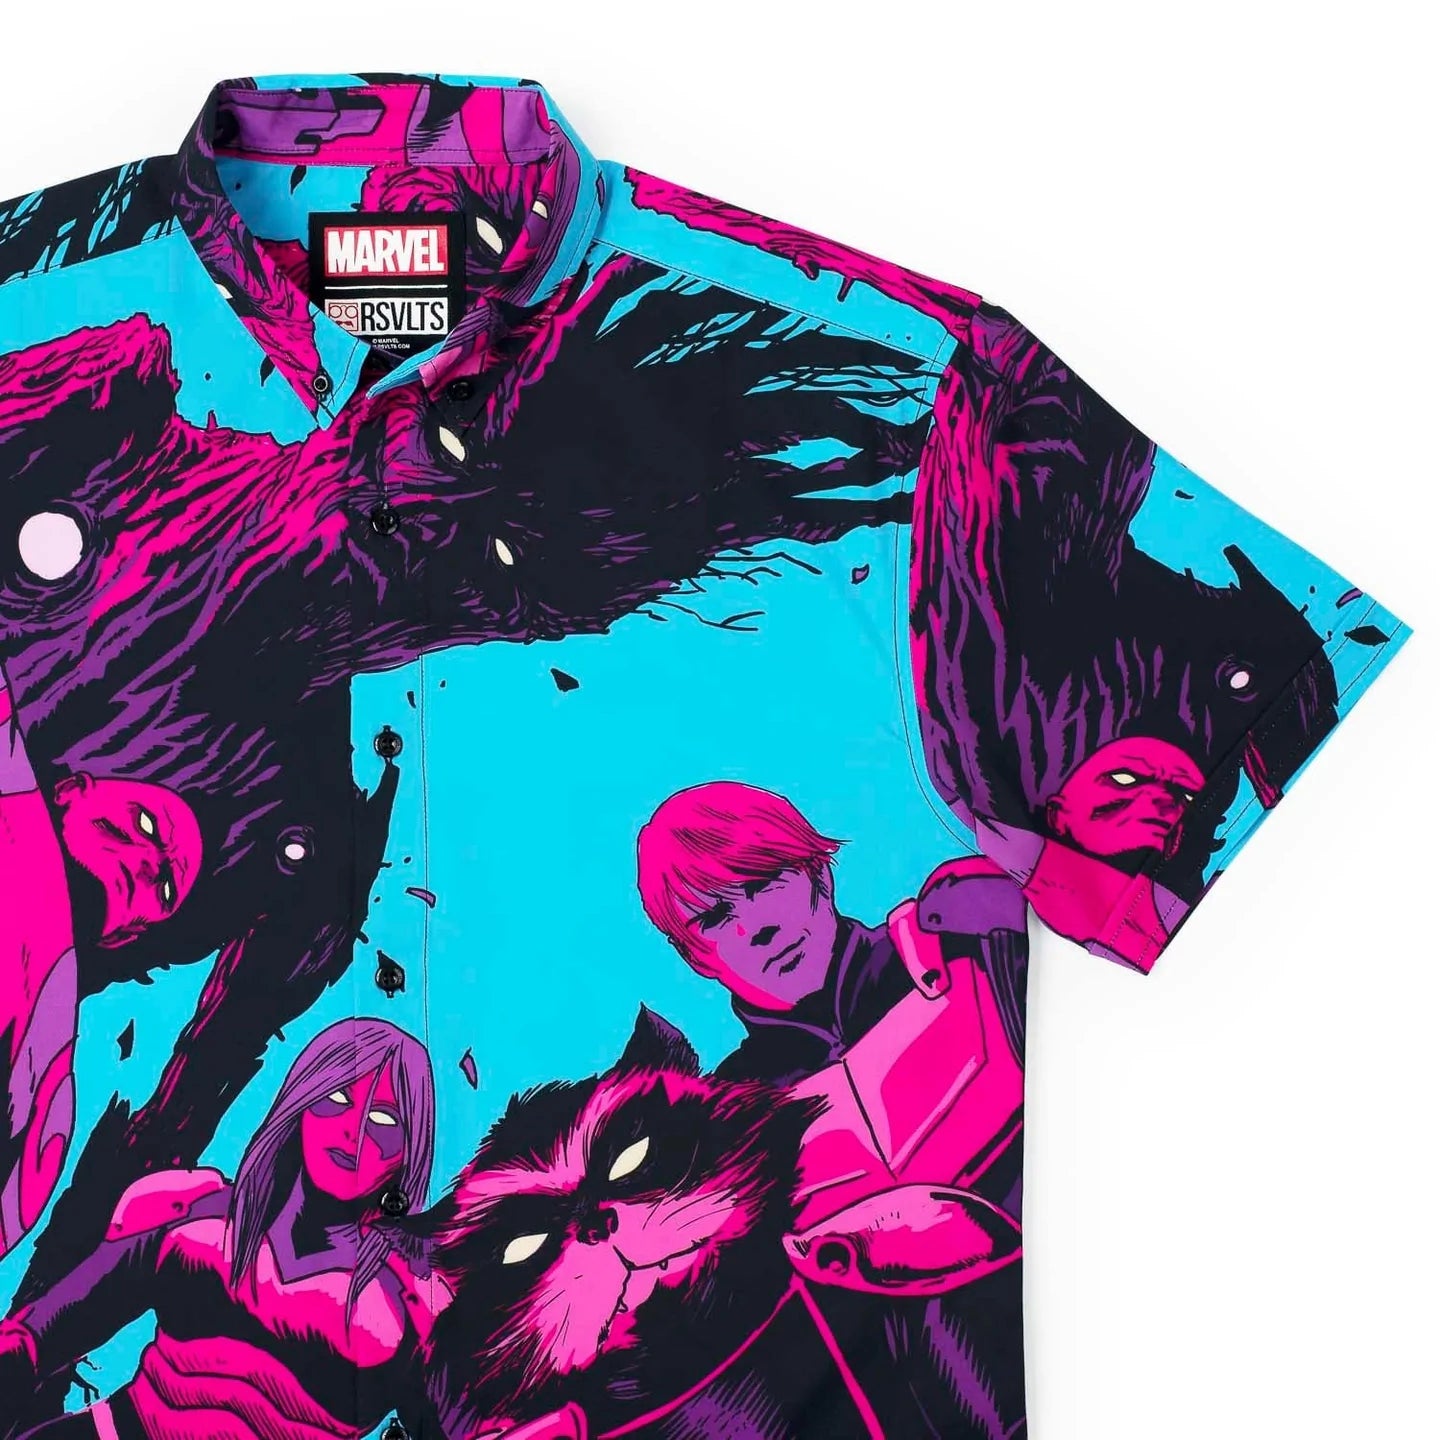 GUARDIANS OF THE GALAXY "'BOUT TO DROP AN AWESOME MIX" Short Sleeve Shirt